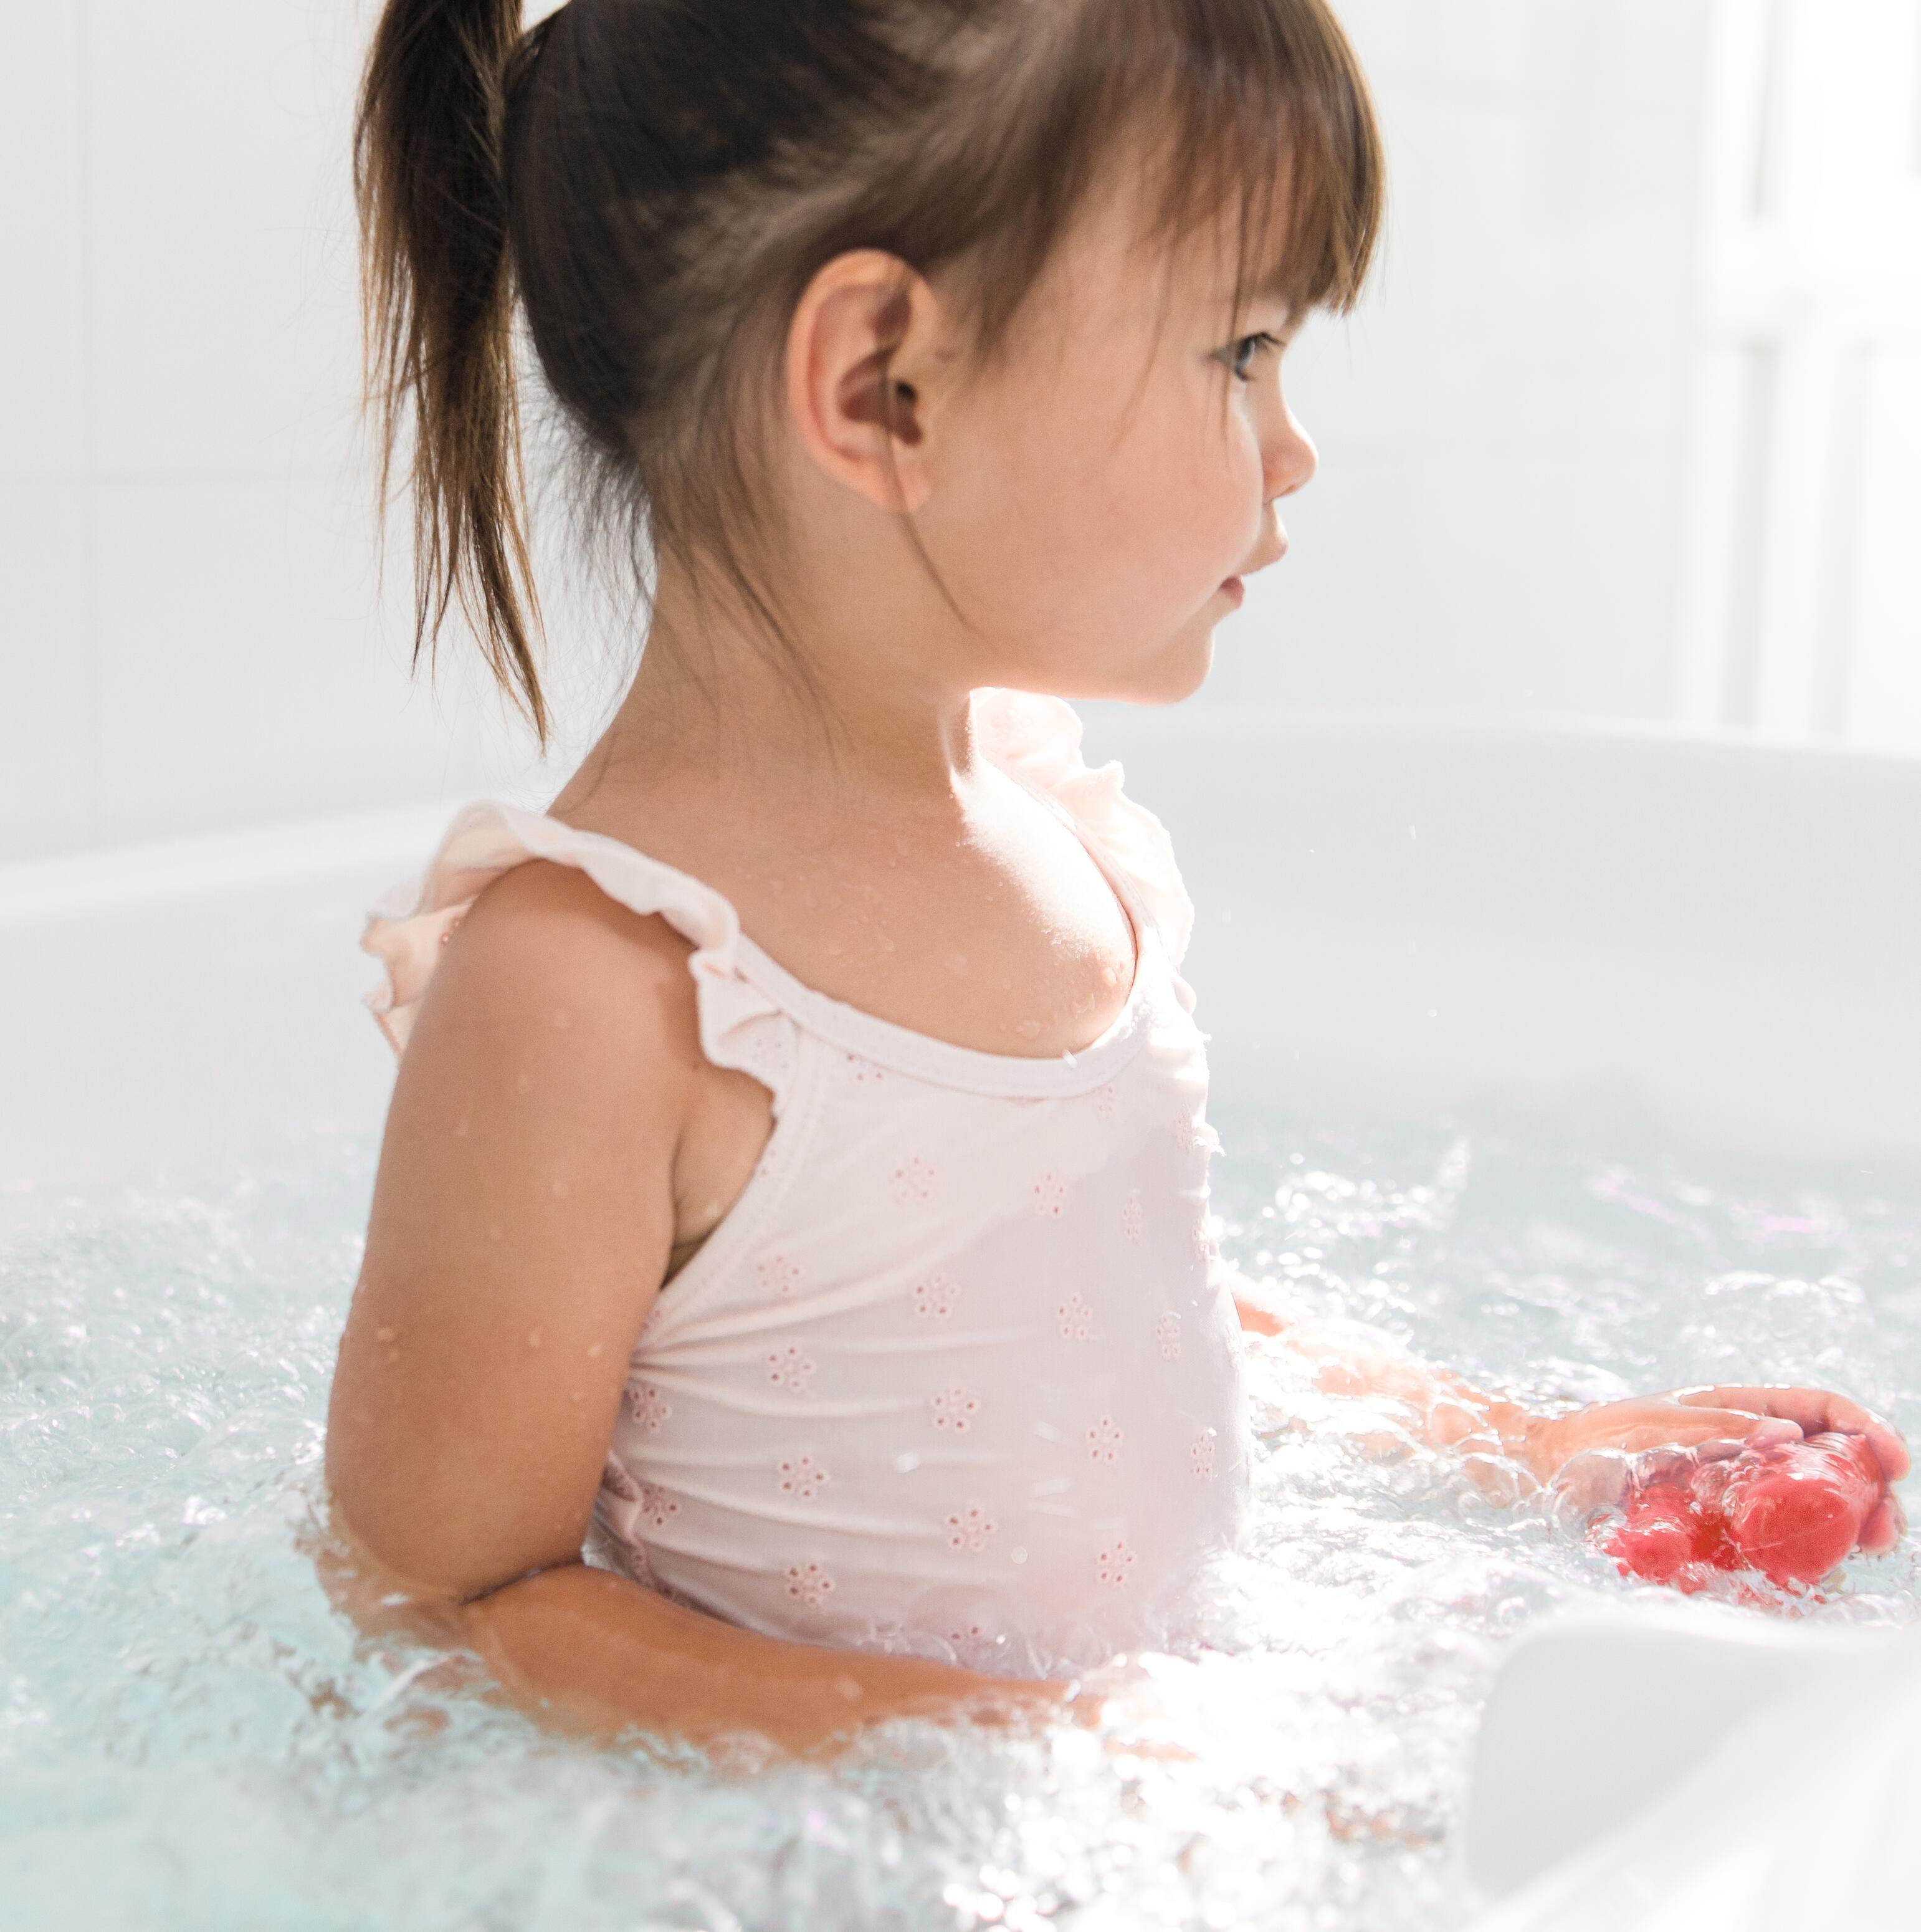 Eczema and psoriasis: can my child take baths?